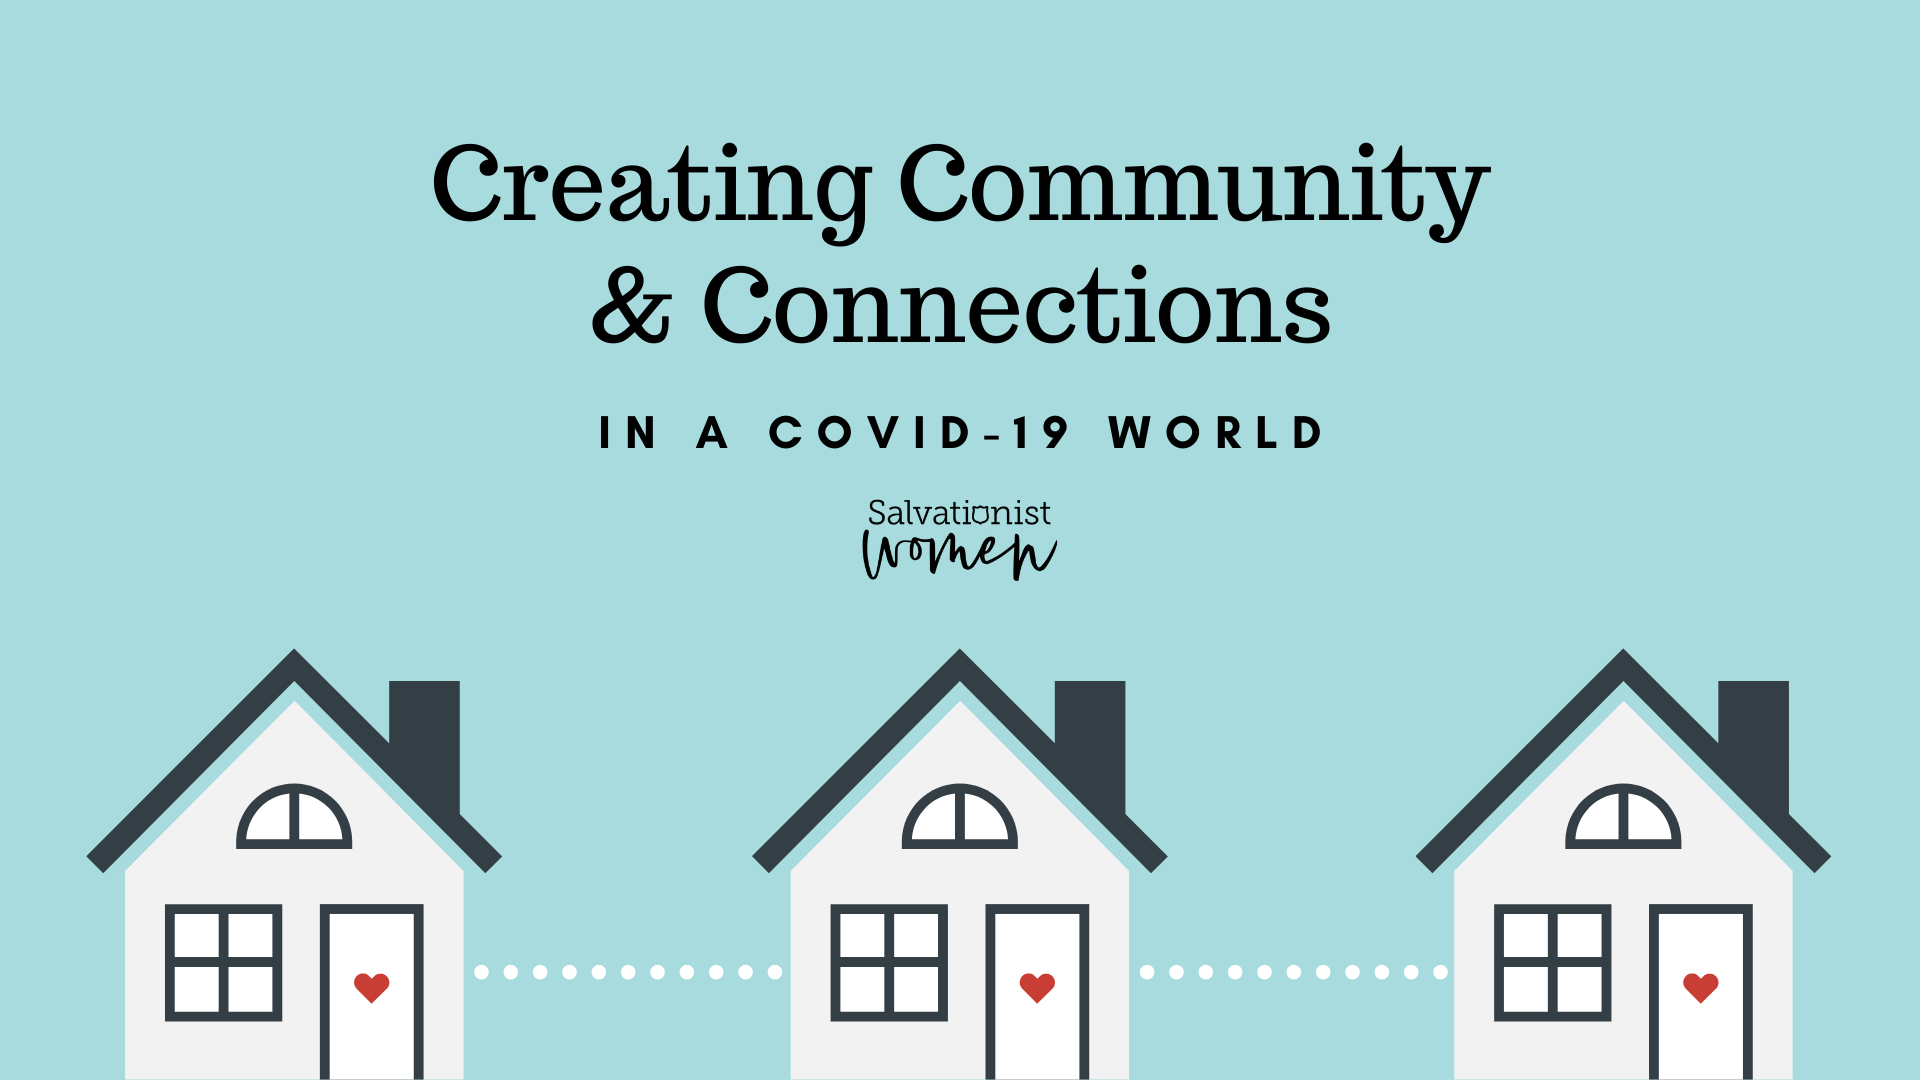 Creating Community & Connections in a COVID-19 World